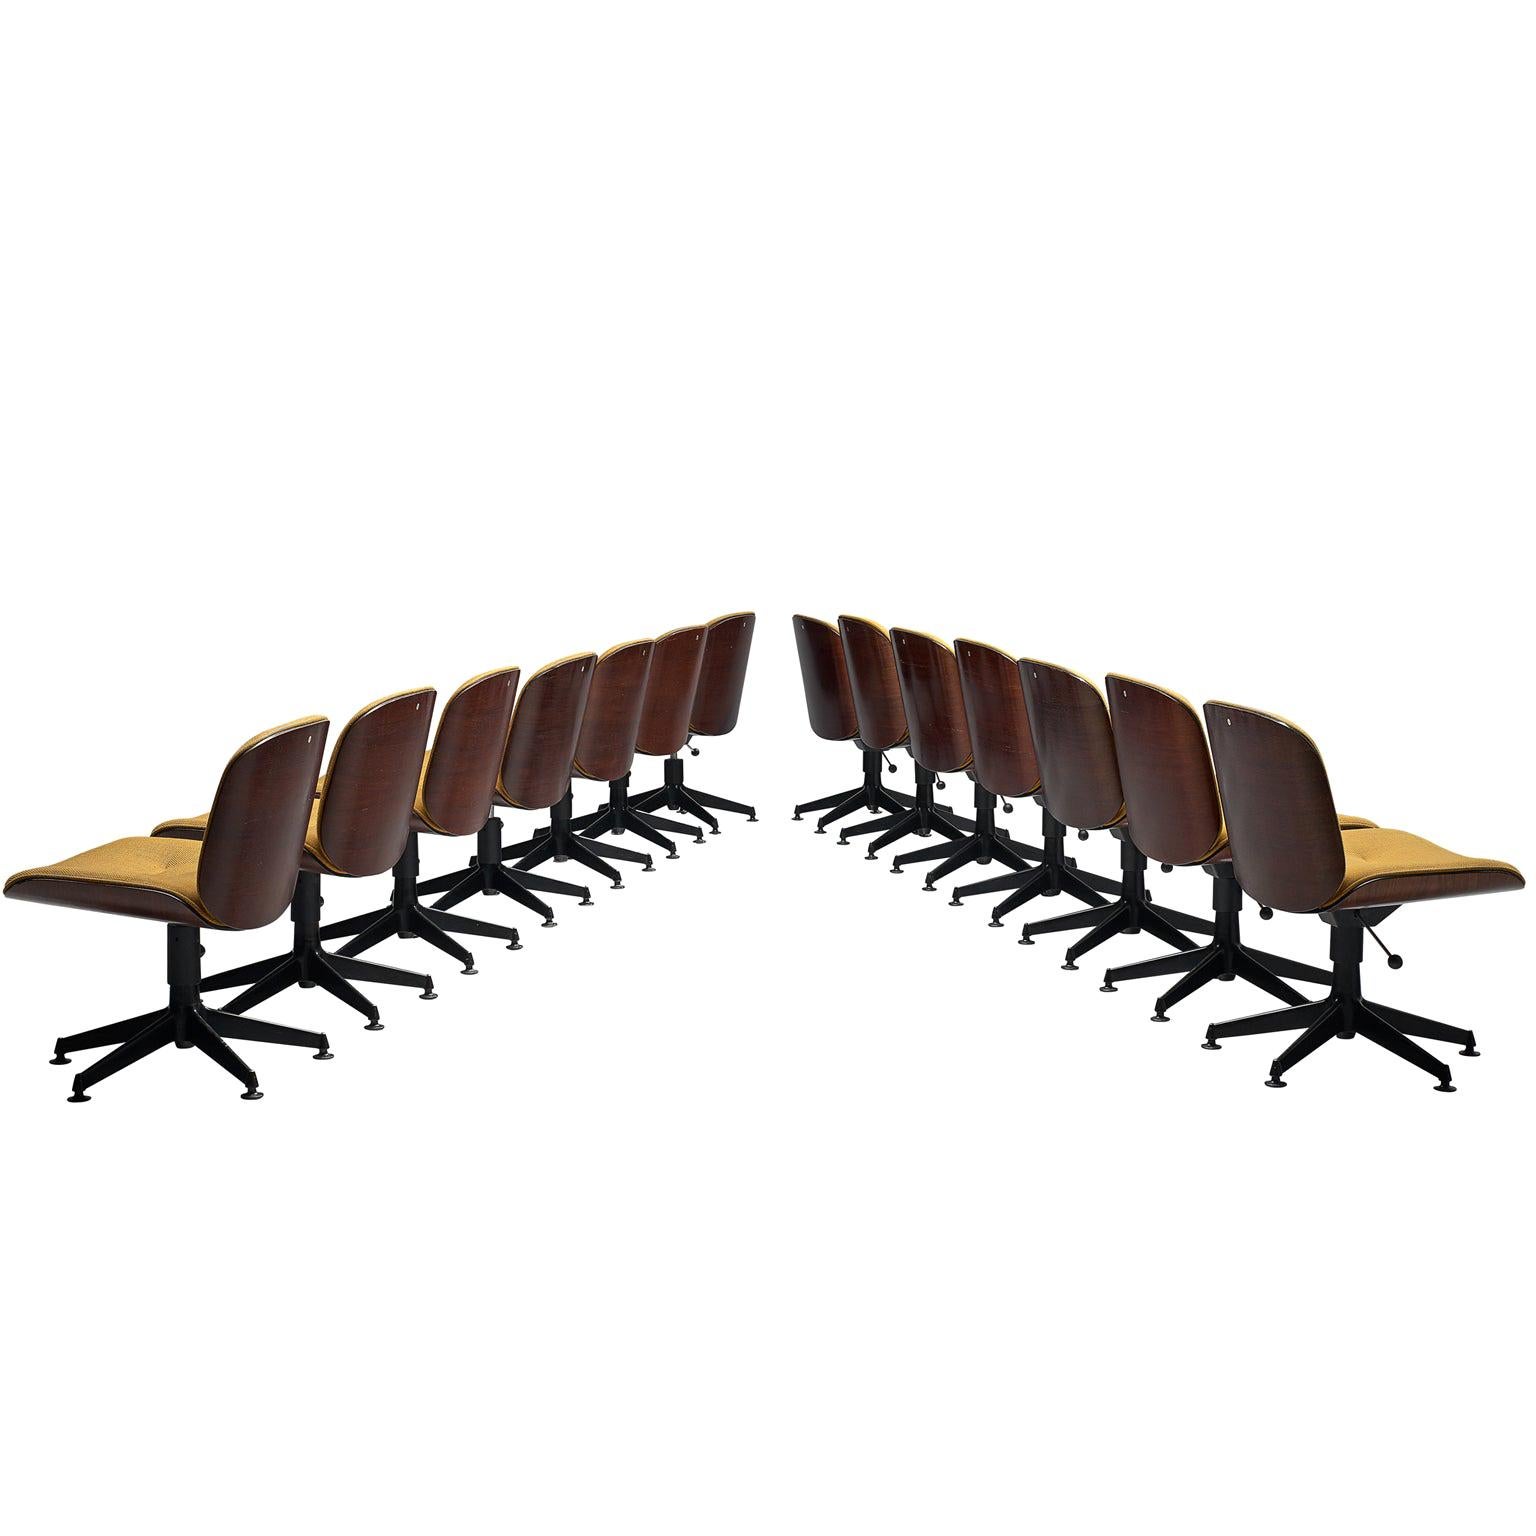 Large Set of Fourteen Rosewood Swivel Chairs by Ico Parisi for MIM Roma